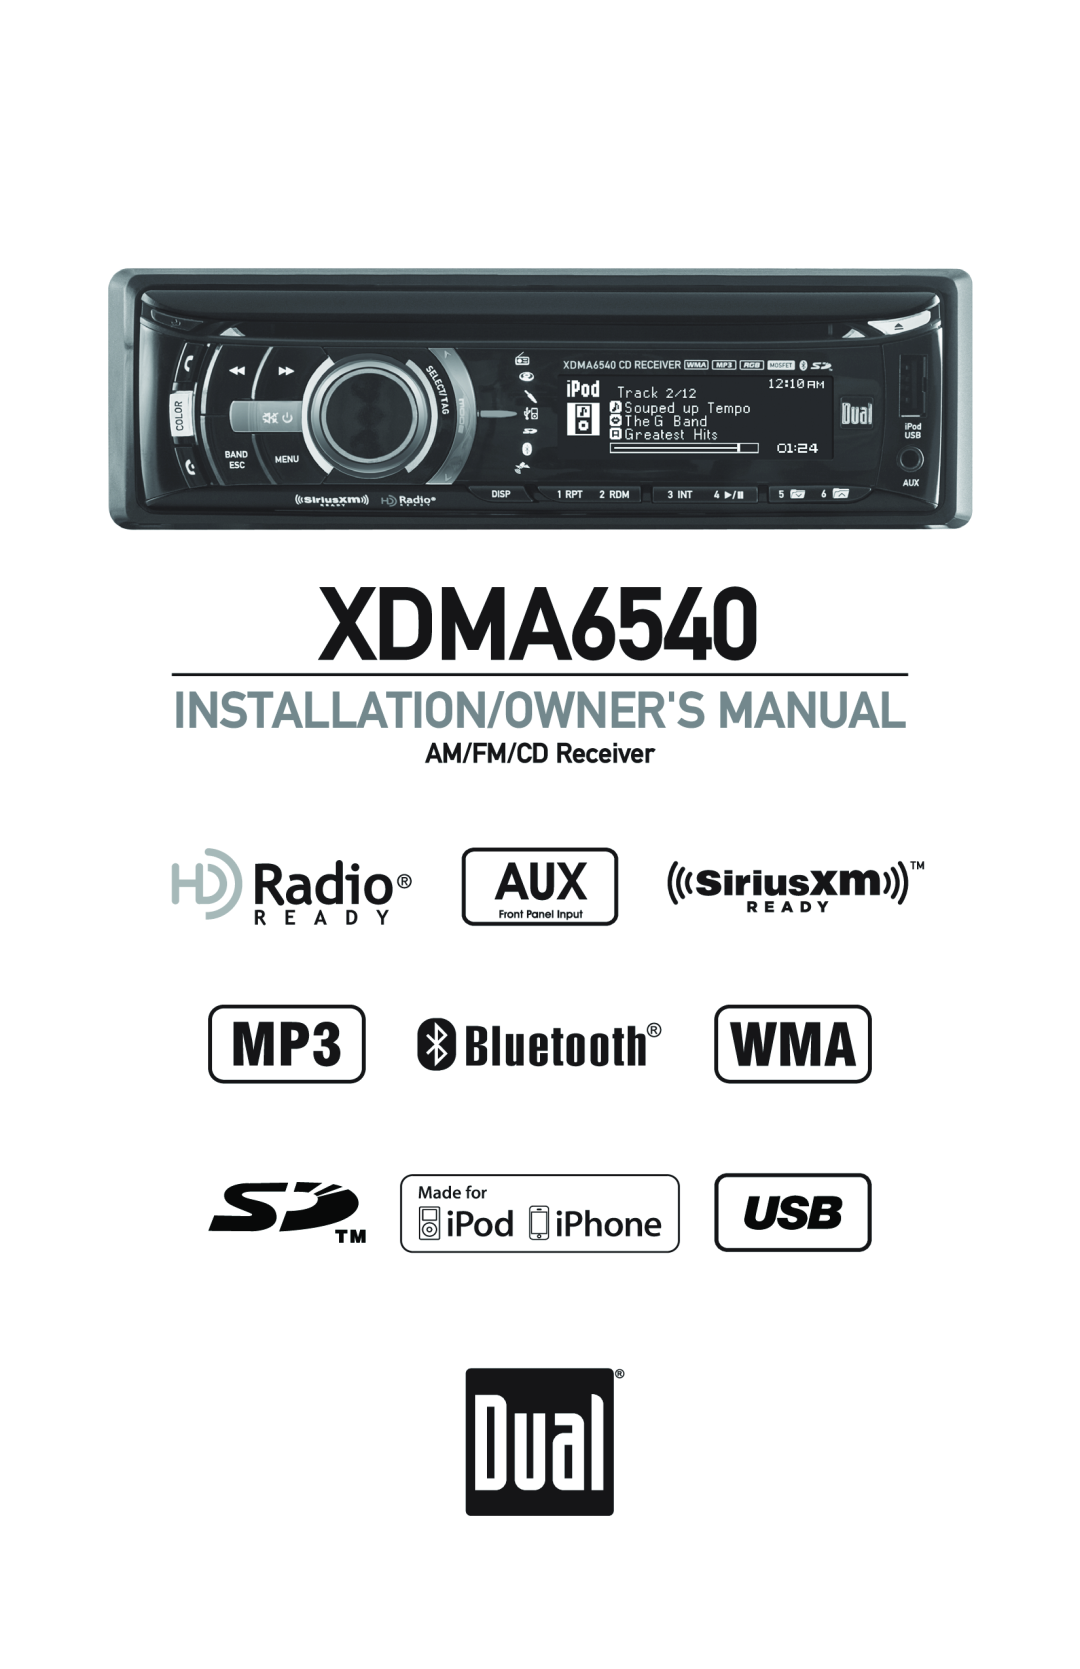 Dual XDMA6540 owner manual AM/FM/CD Receiver, Installation/Owners Manual 